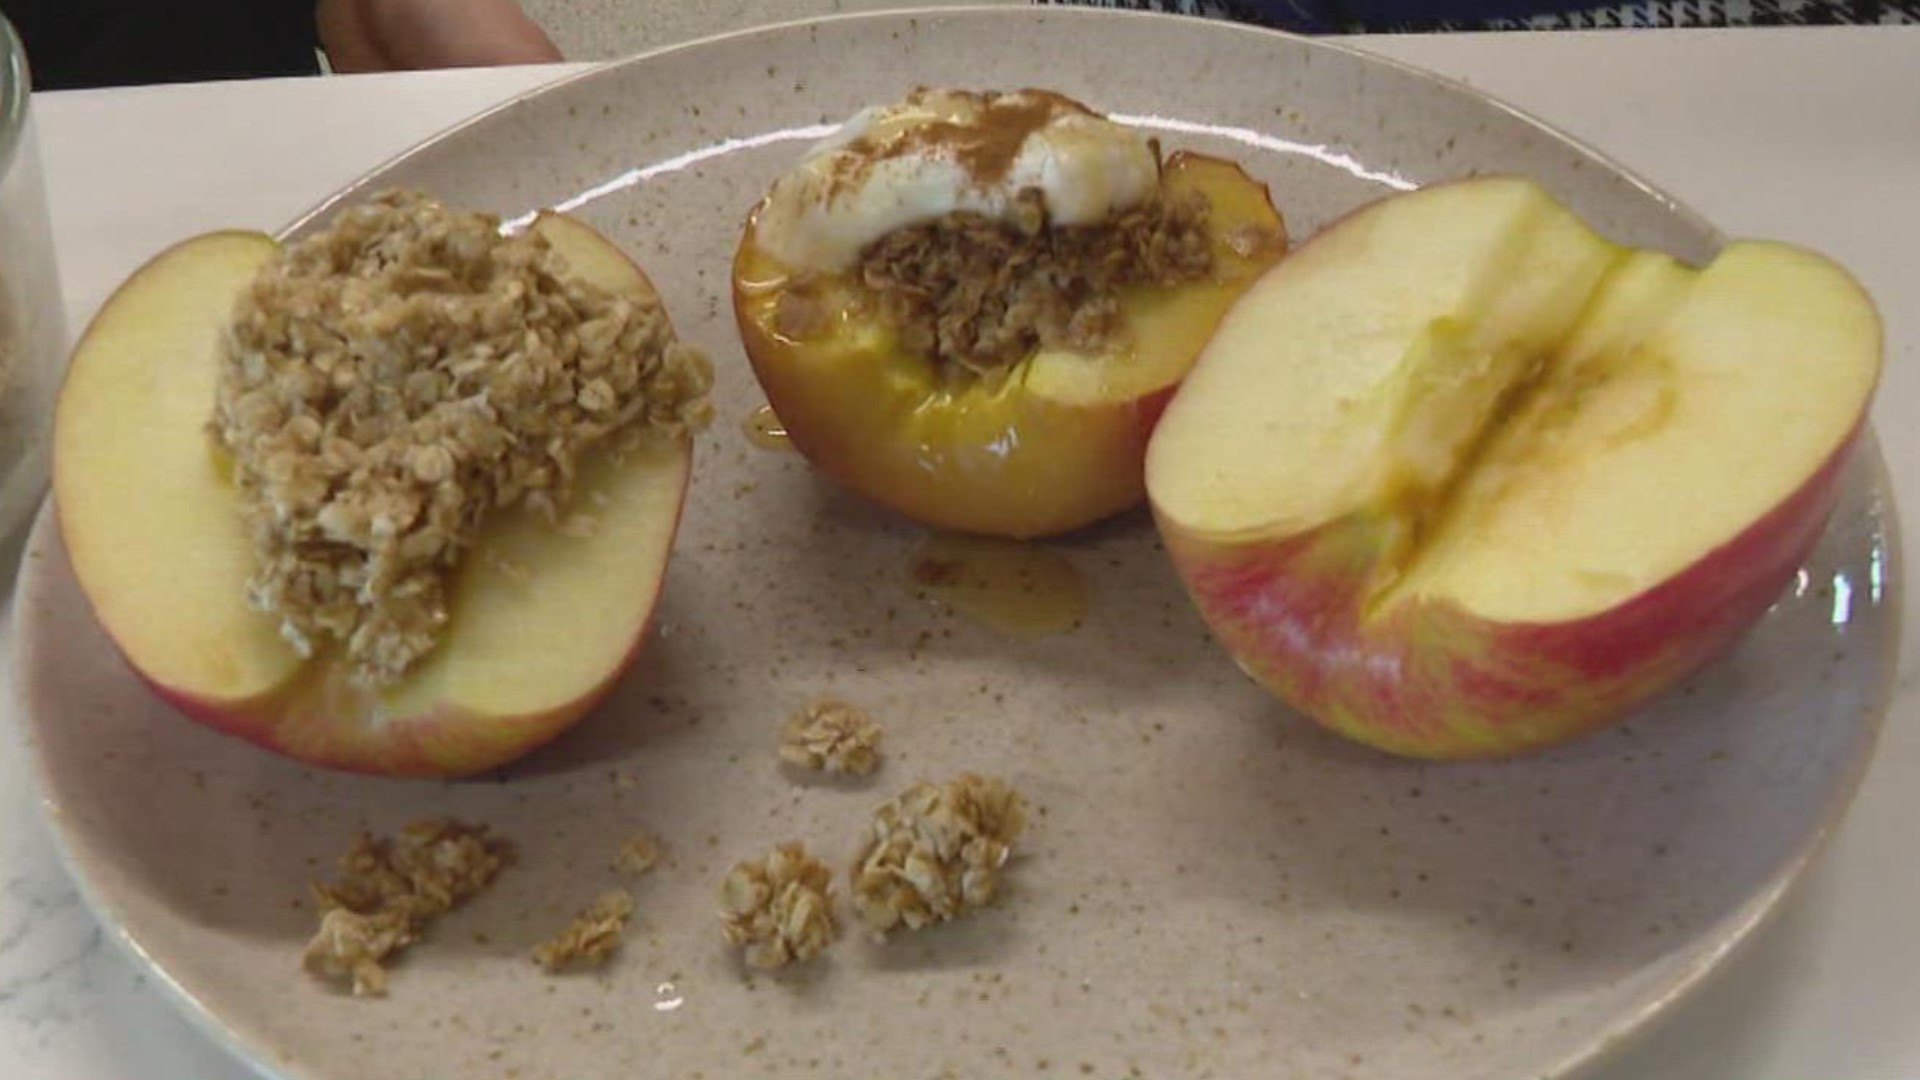 Emily showed us how to make a delicious fall dessert that's also healthy - a baked apple cinnamon crisp.